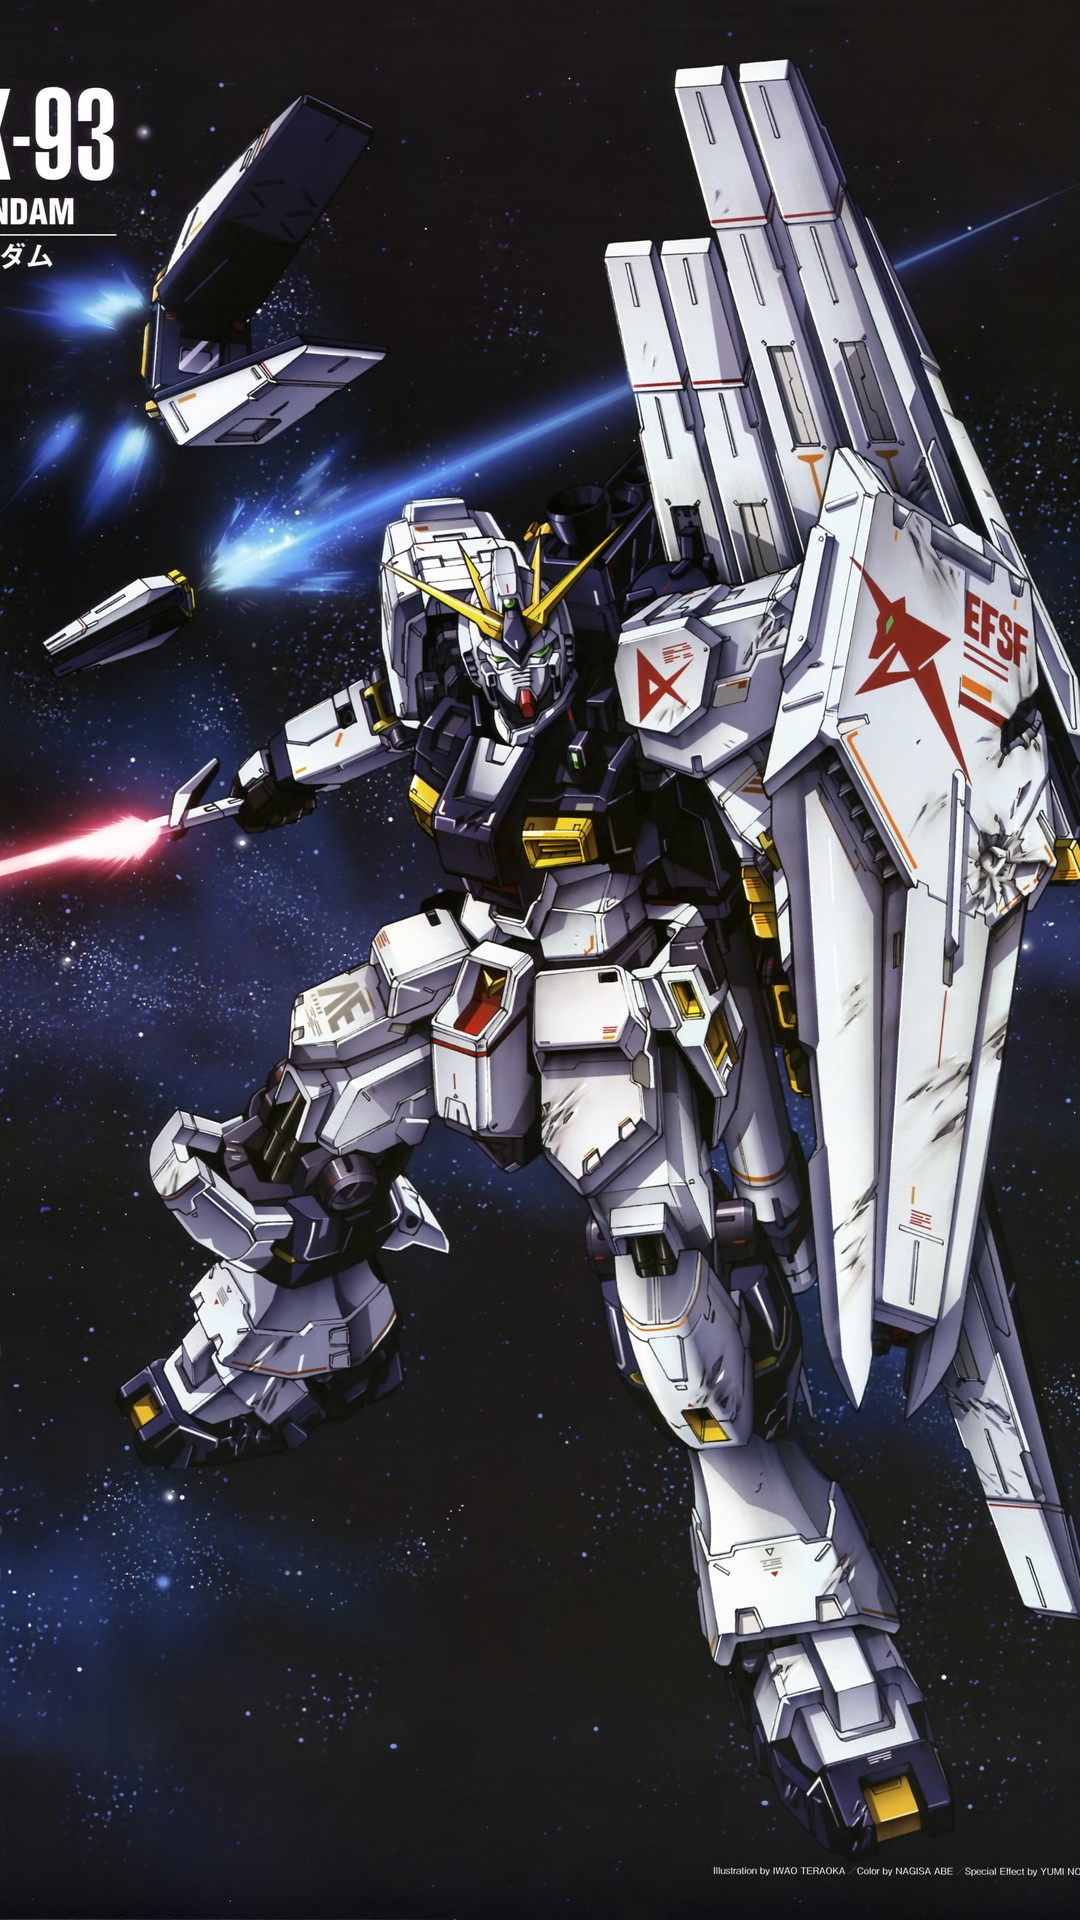 Gundam iPhone Wallpaper With high-resolution 1080X1920 pixel. You can use this wallpaper for your iPhone 5, 6, 7, 8, X, XS, XR backgrounds, Mobile Screensaver, or iPad Lock Screen